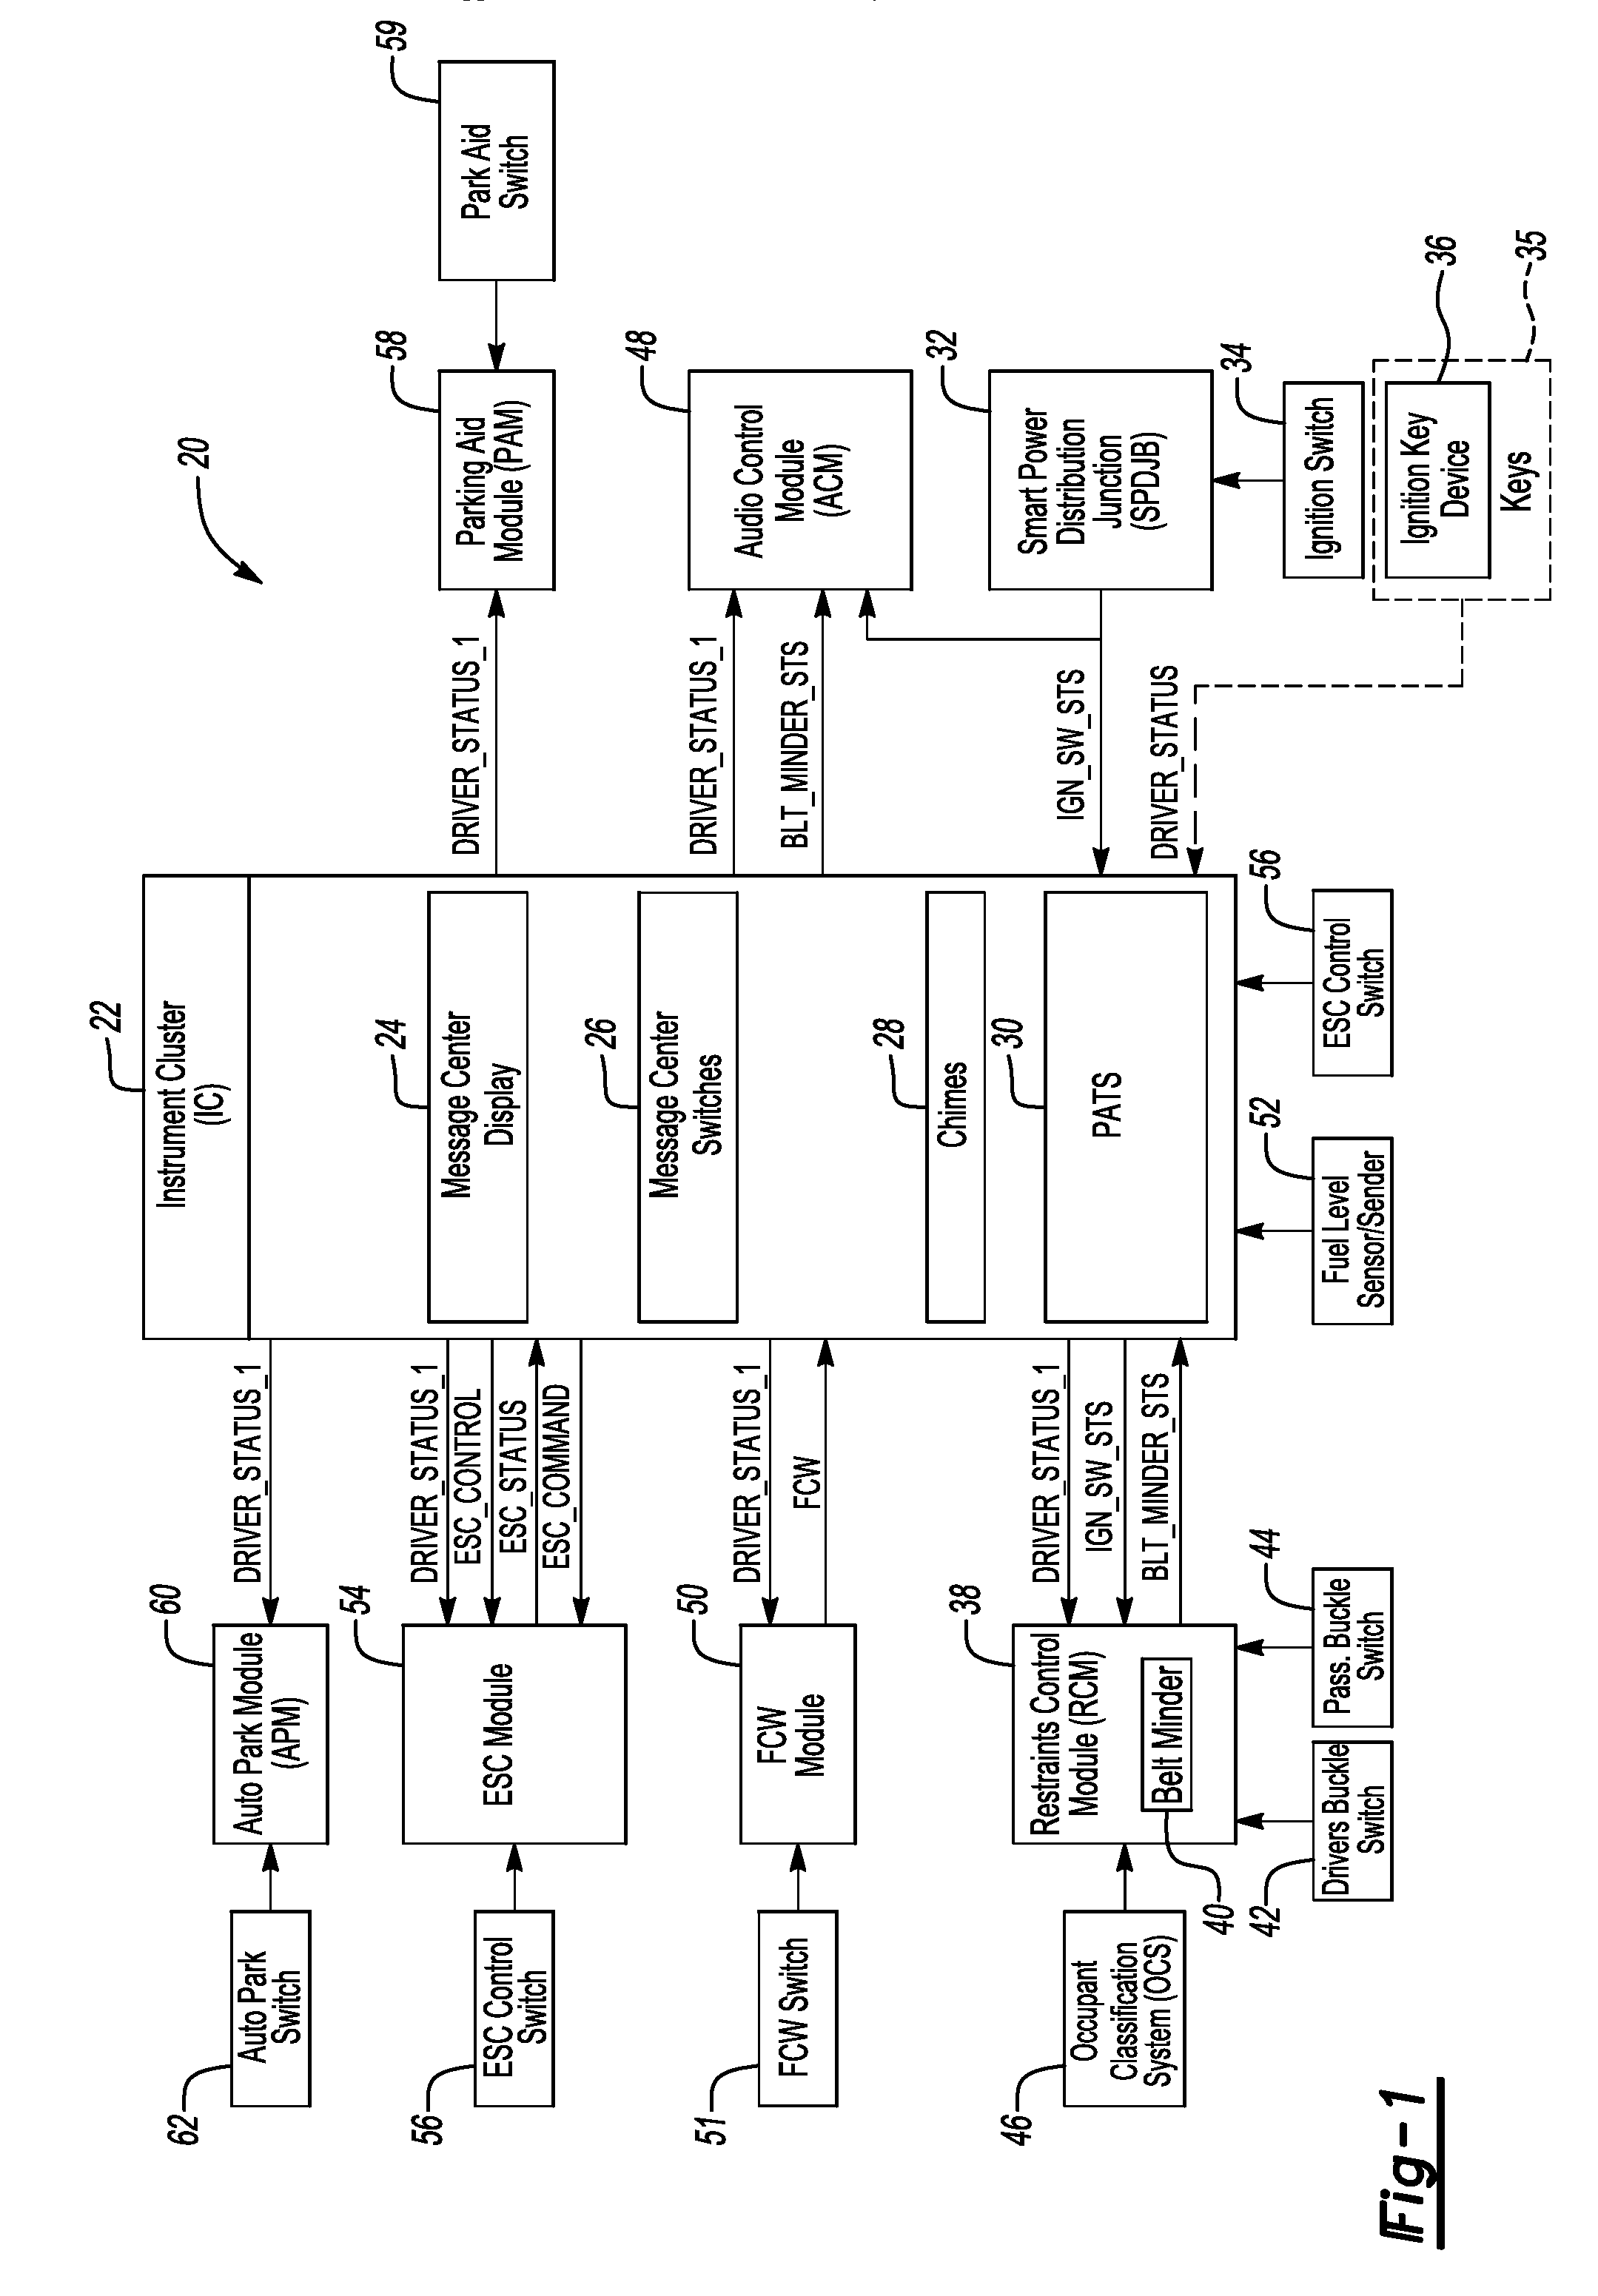 System and method for controlling electronic stability control based on driver status